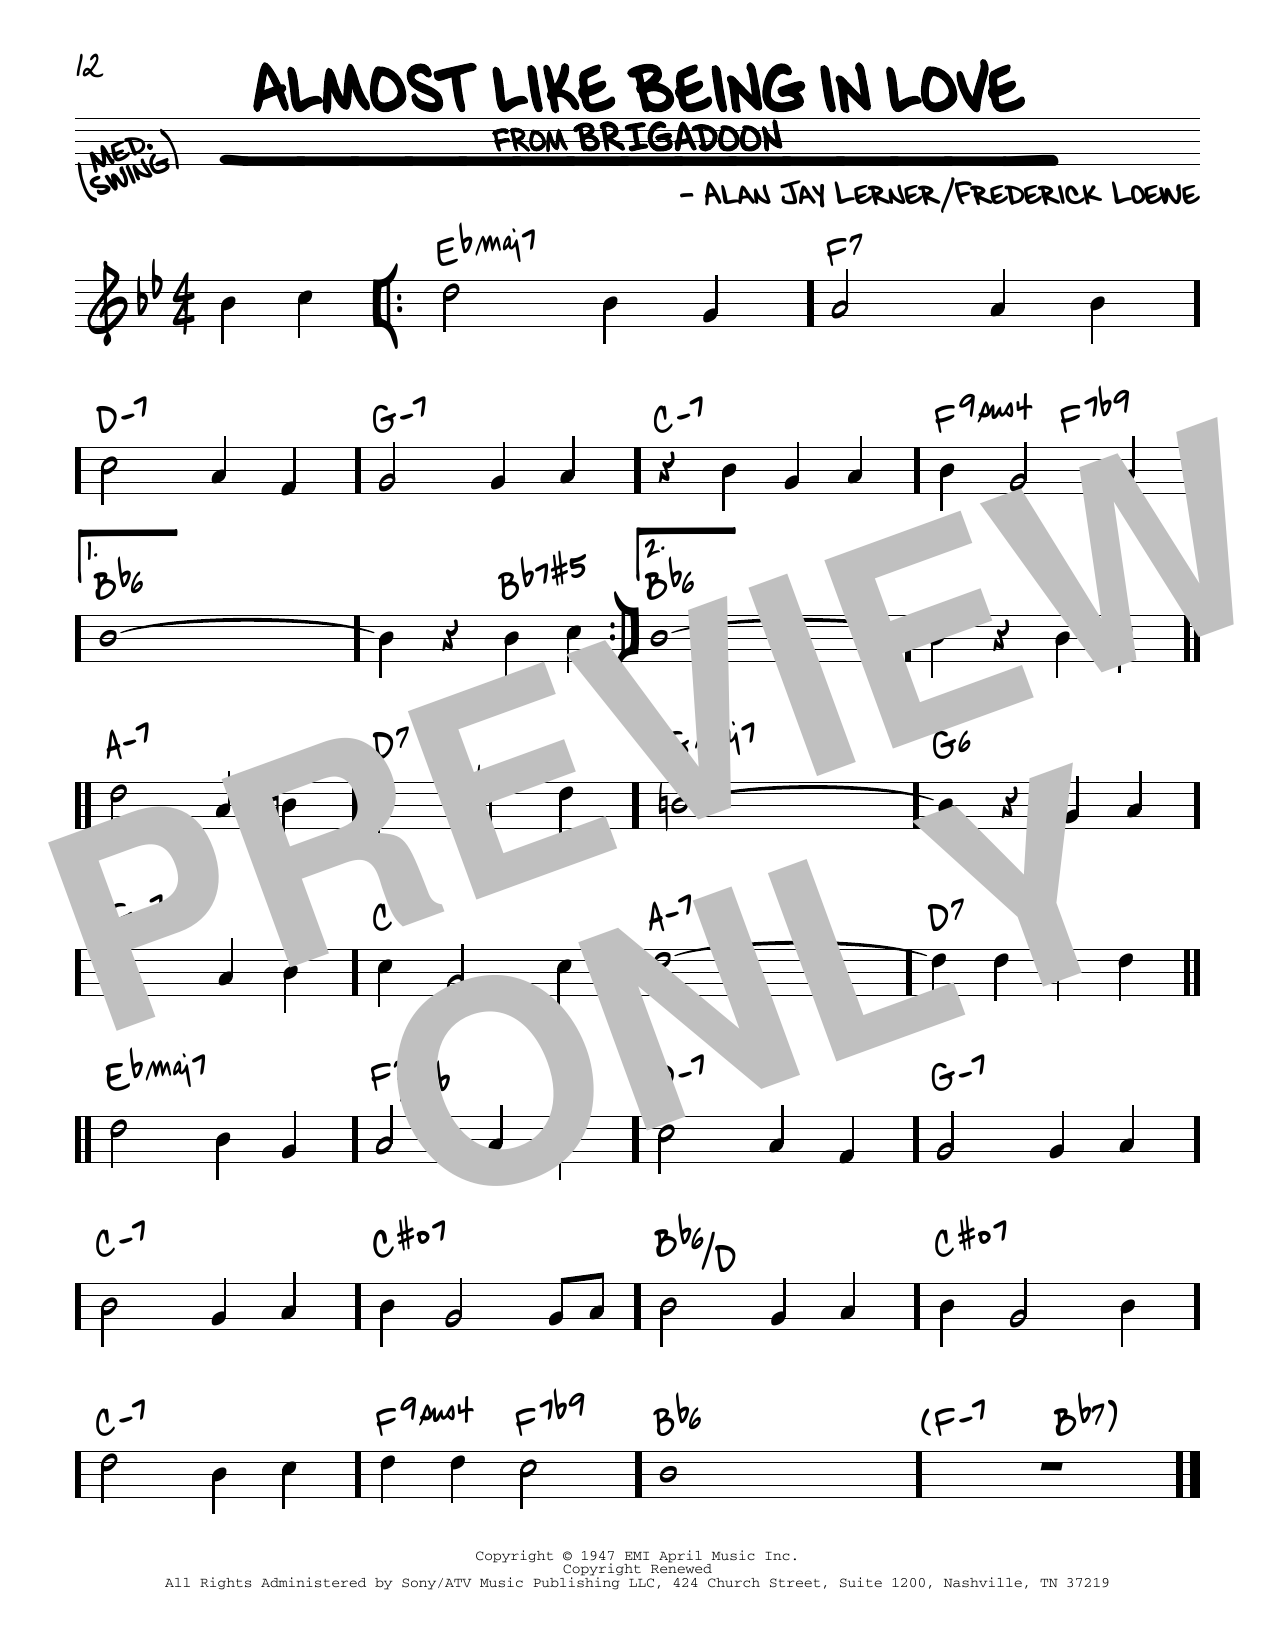 Alan Jay Lerner Almost Like Being In Love sheet music notes and chords. Download Printable PDF.